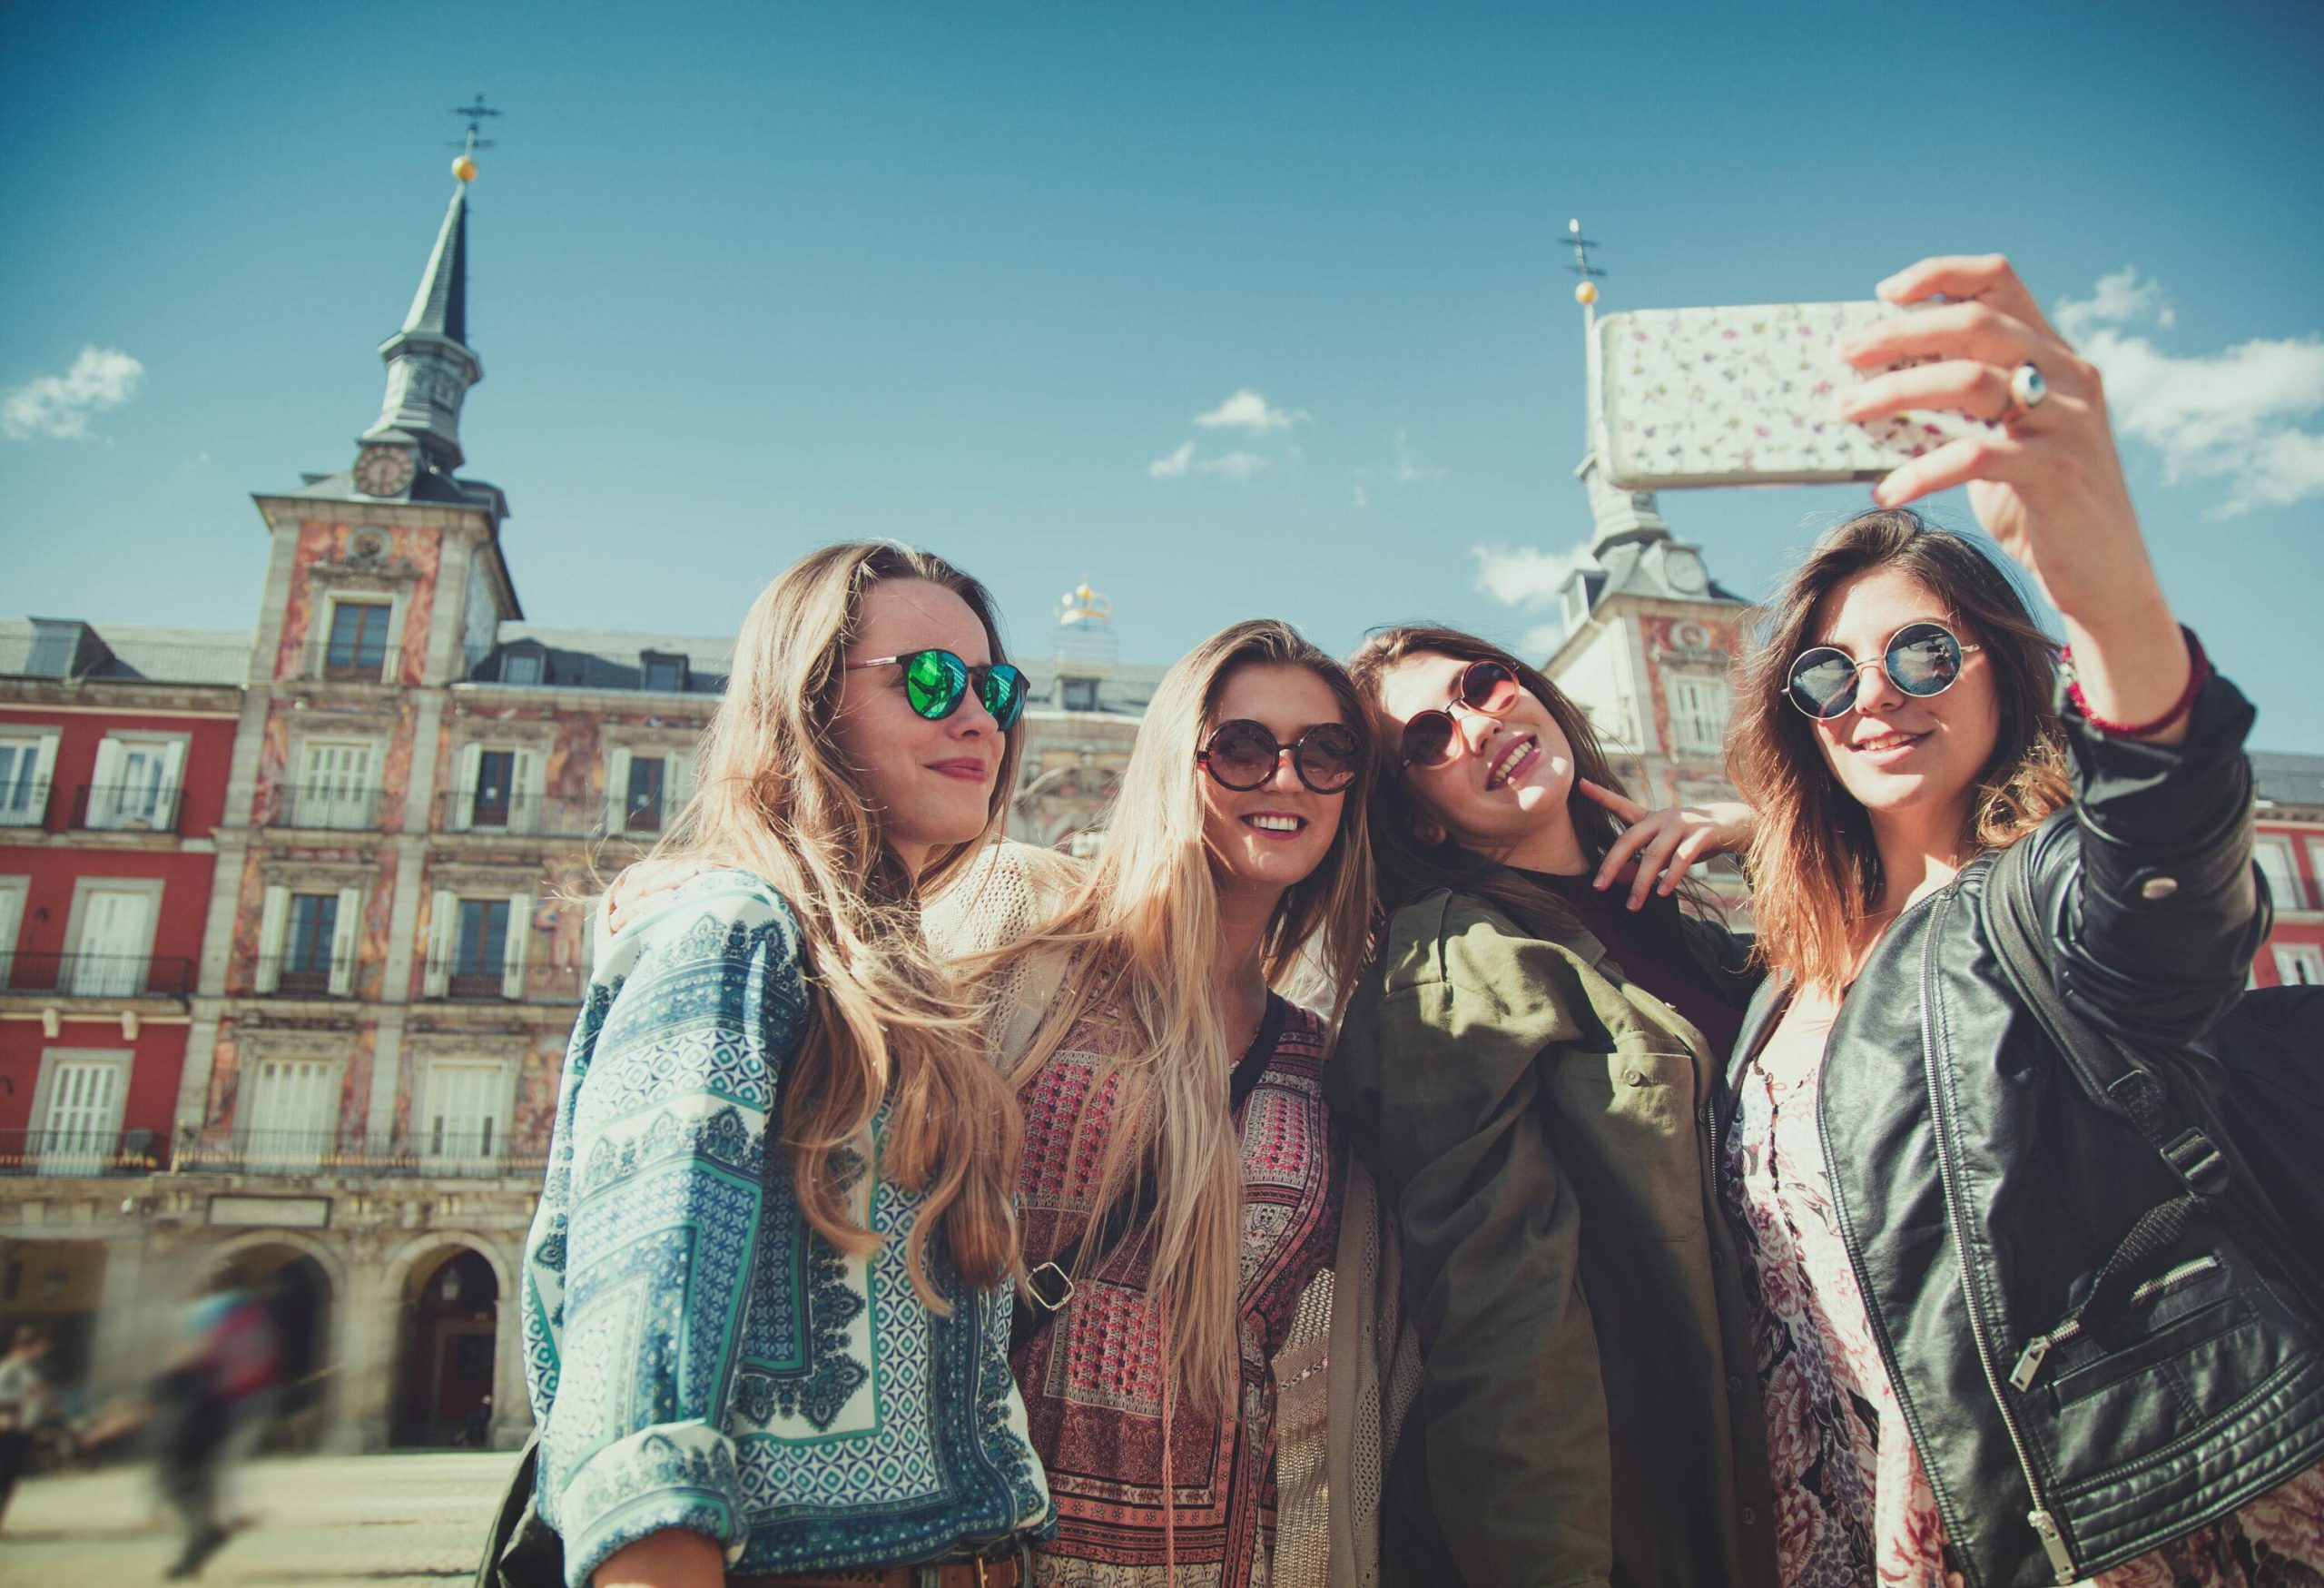 Four women take a selfie in front of a classic historical building.